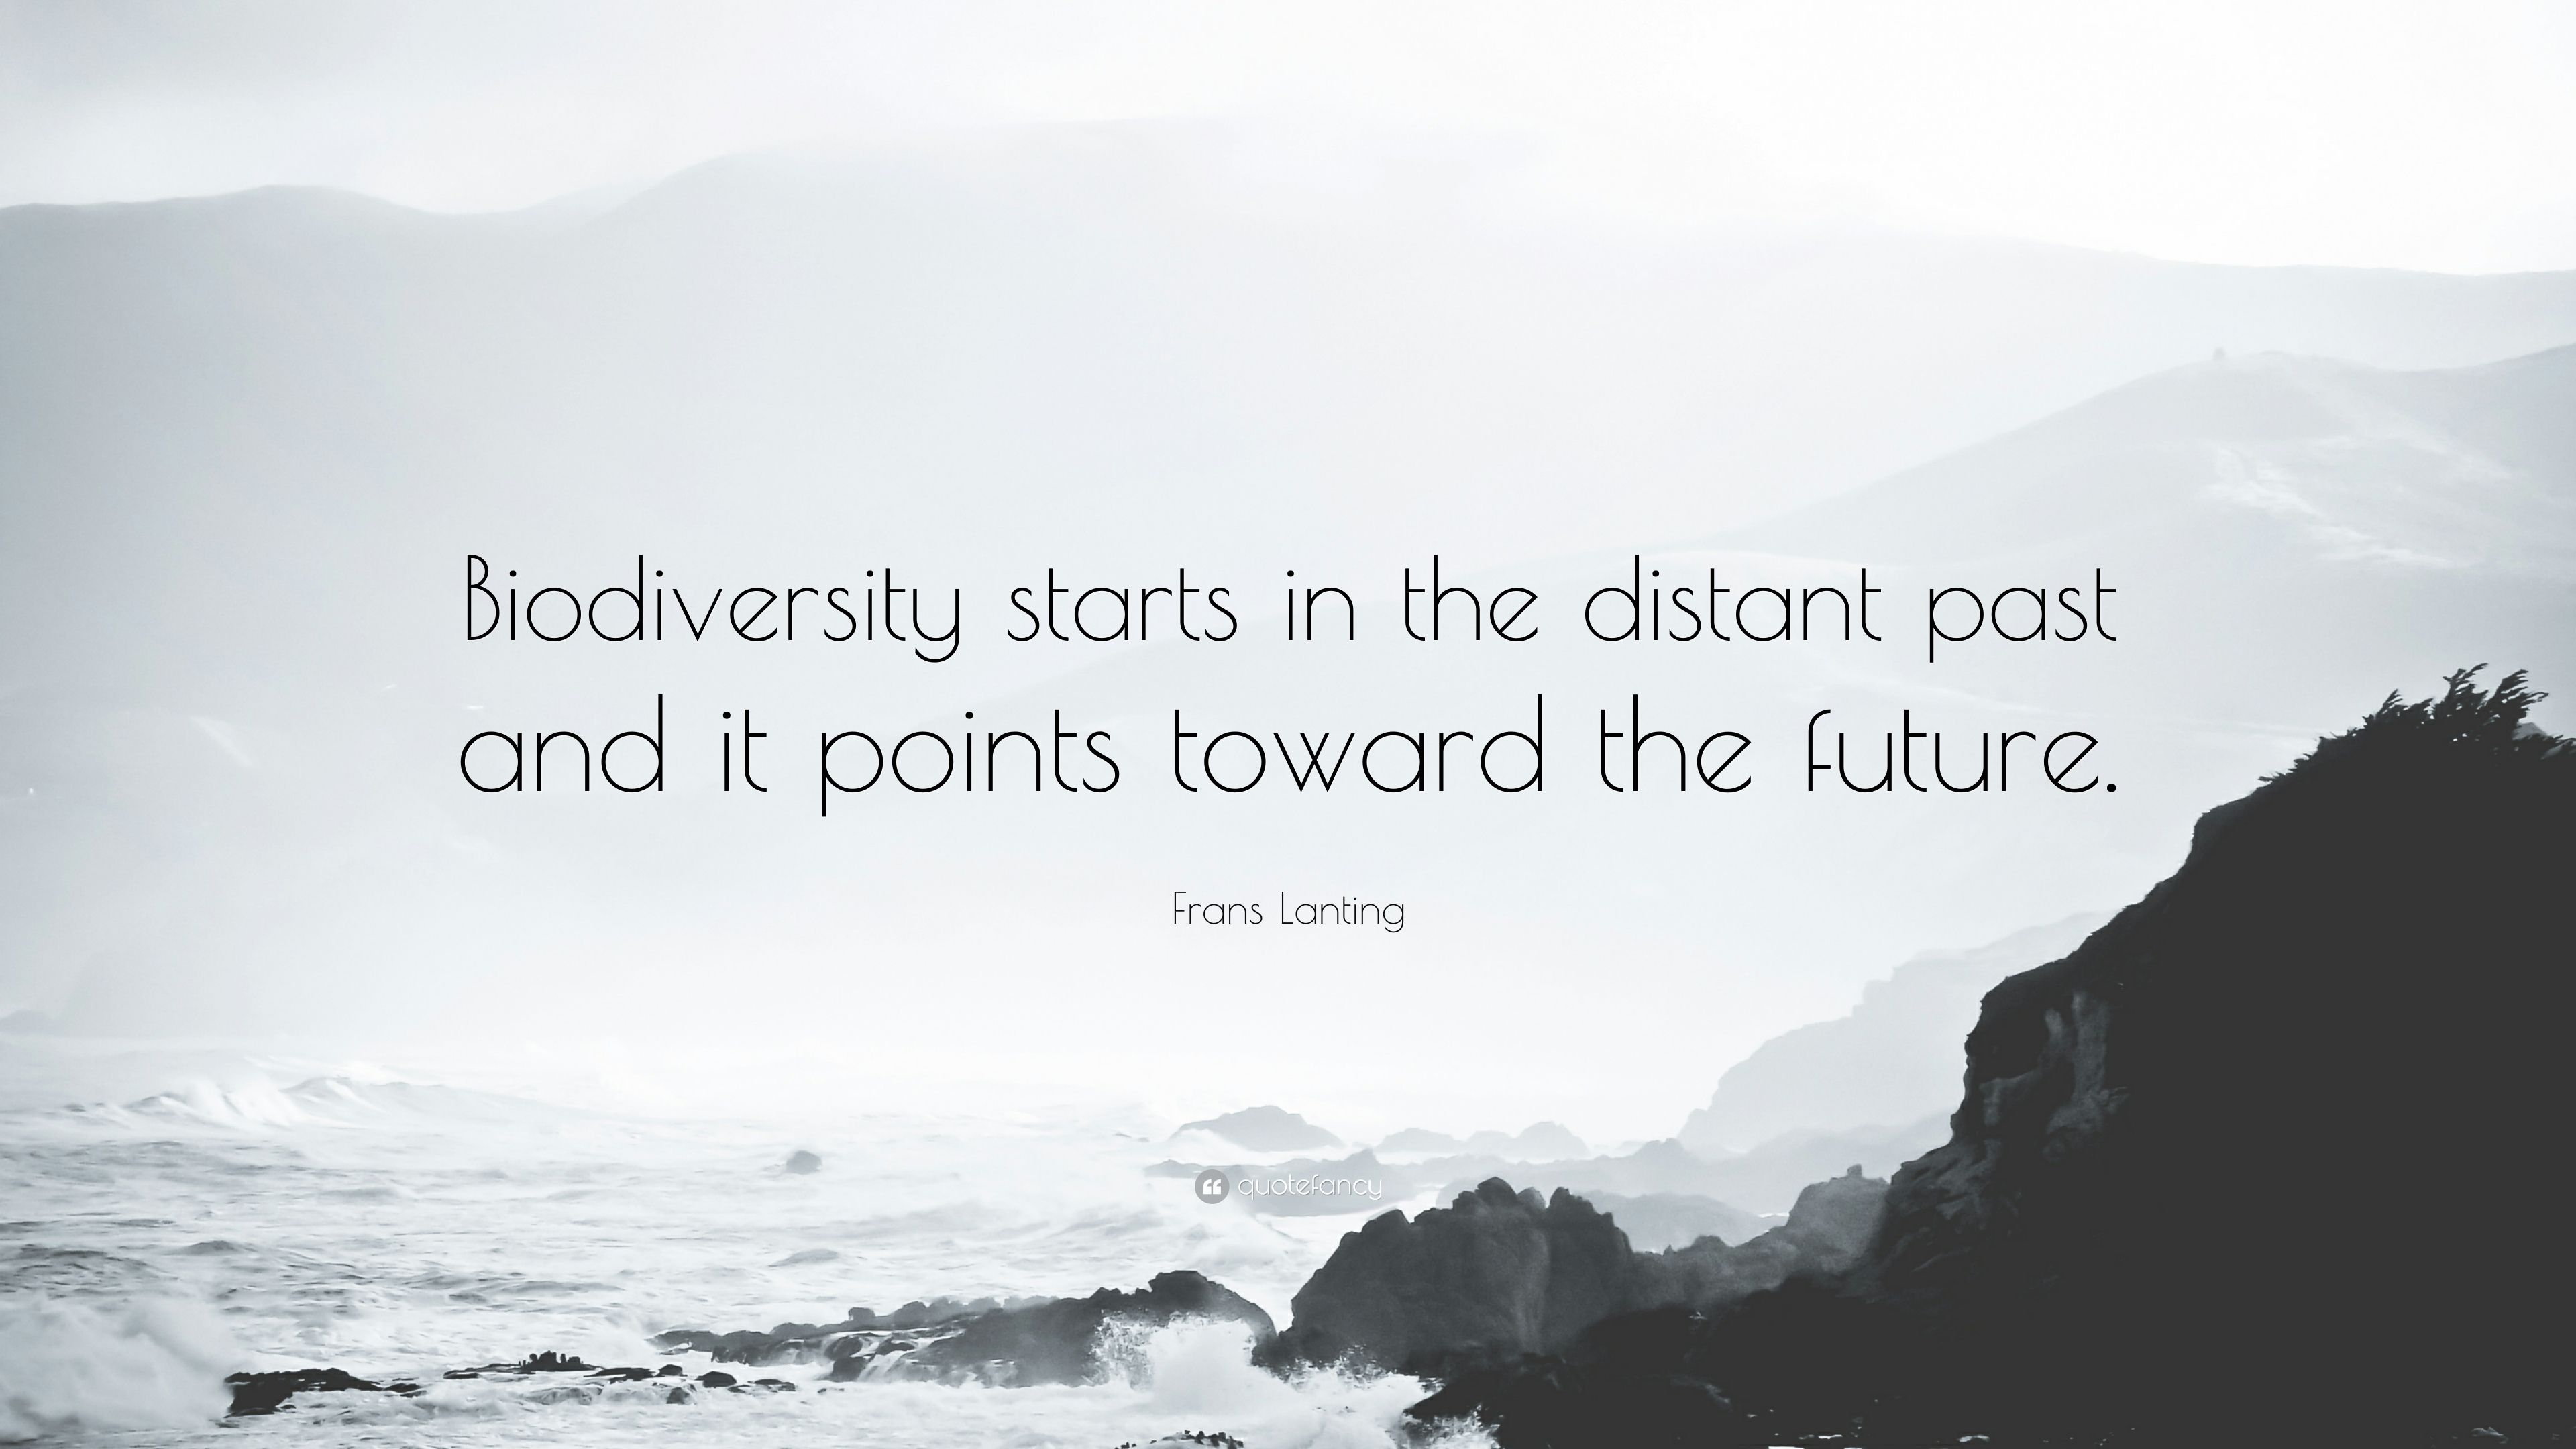 Frans Lanting Quote: “Biodiversity starts in the distant past and it points toward the future.” (7 wallpaper)